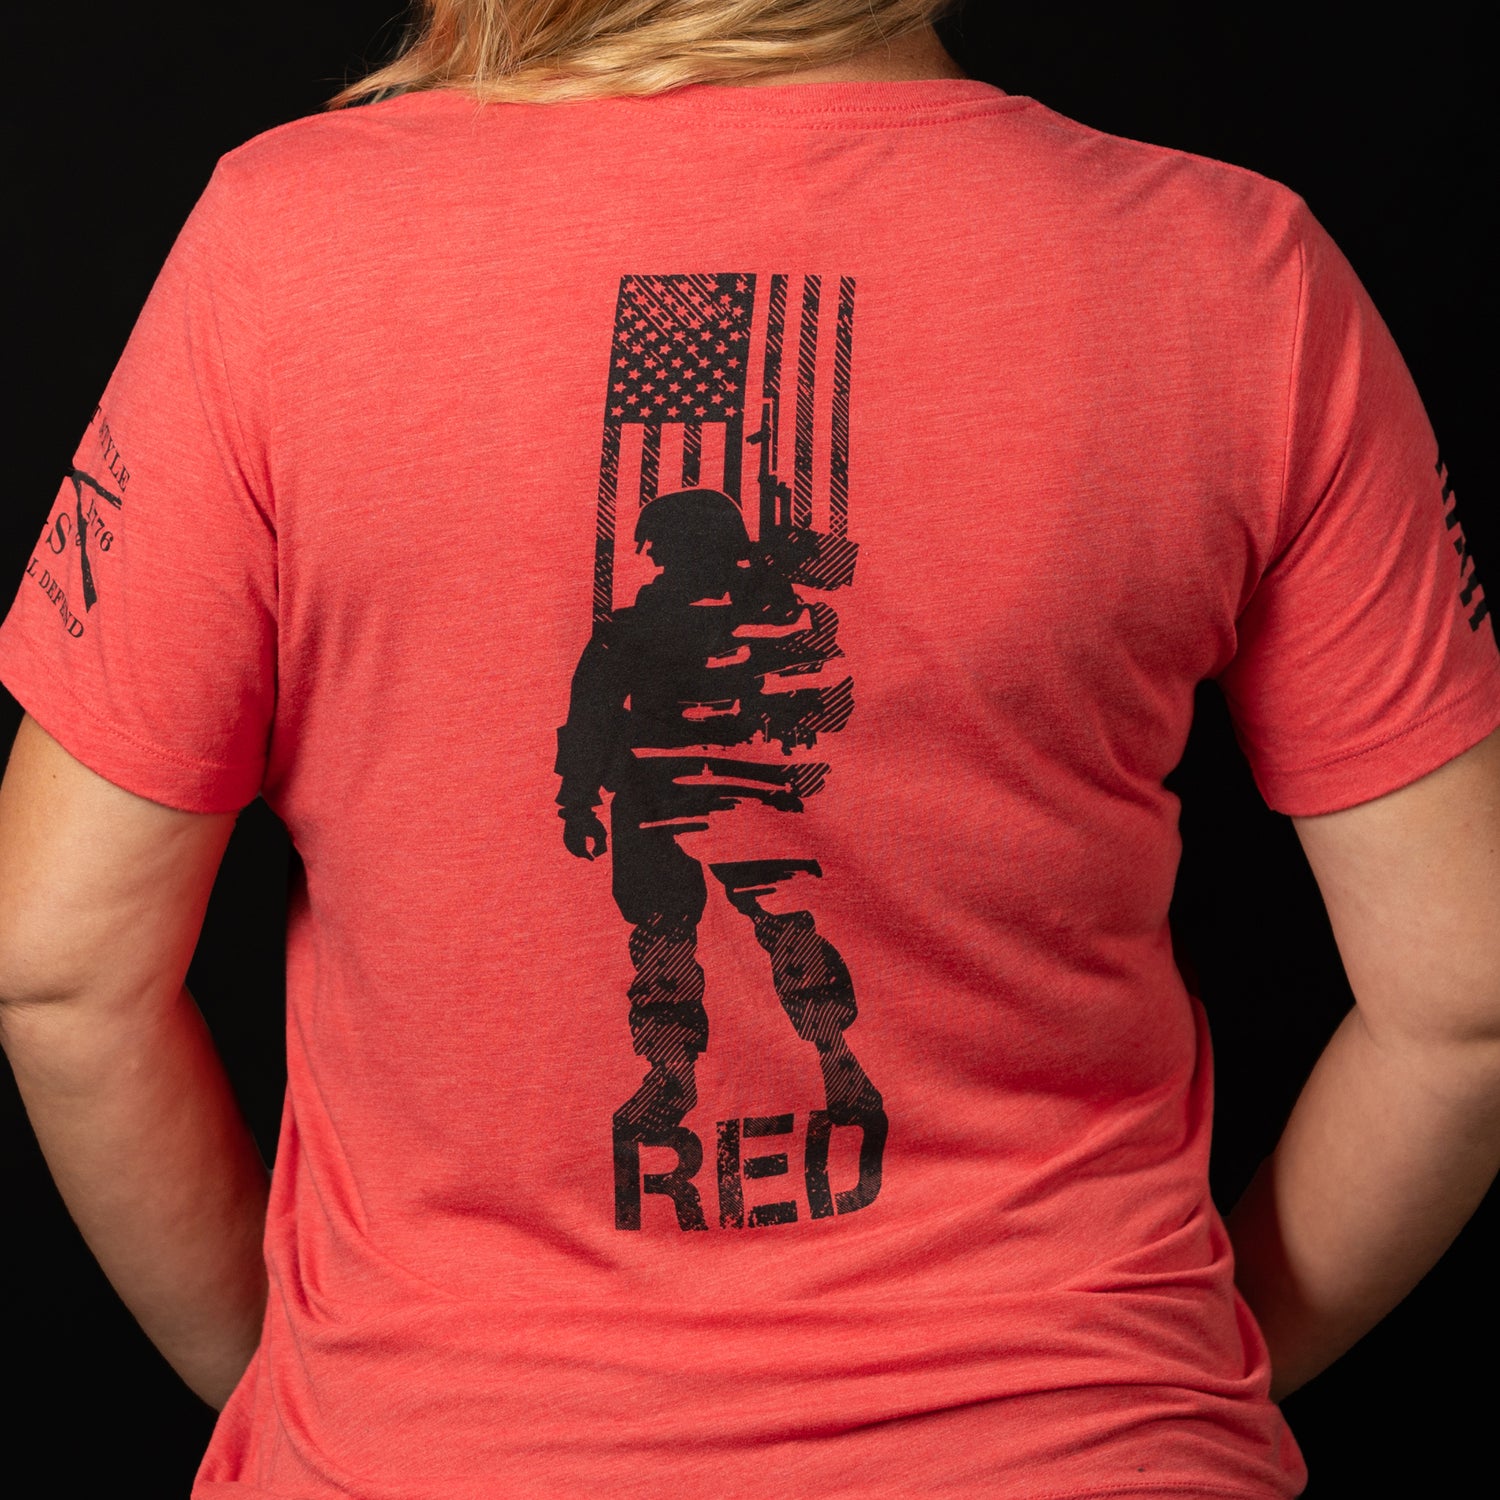 RED Friday Tops for Women 